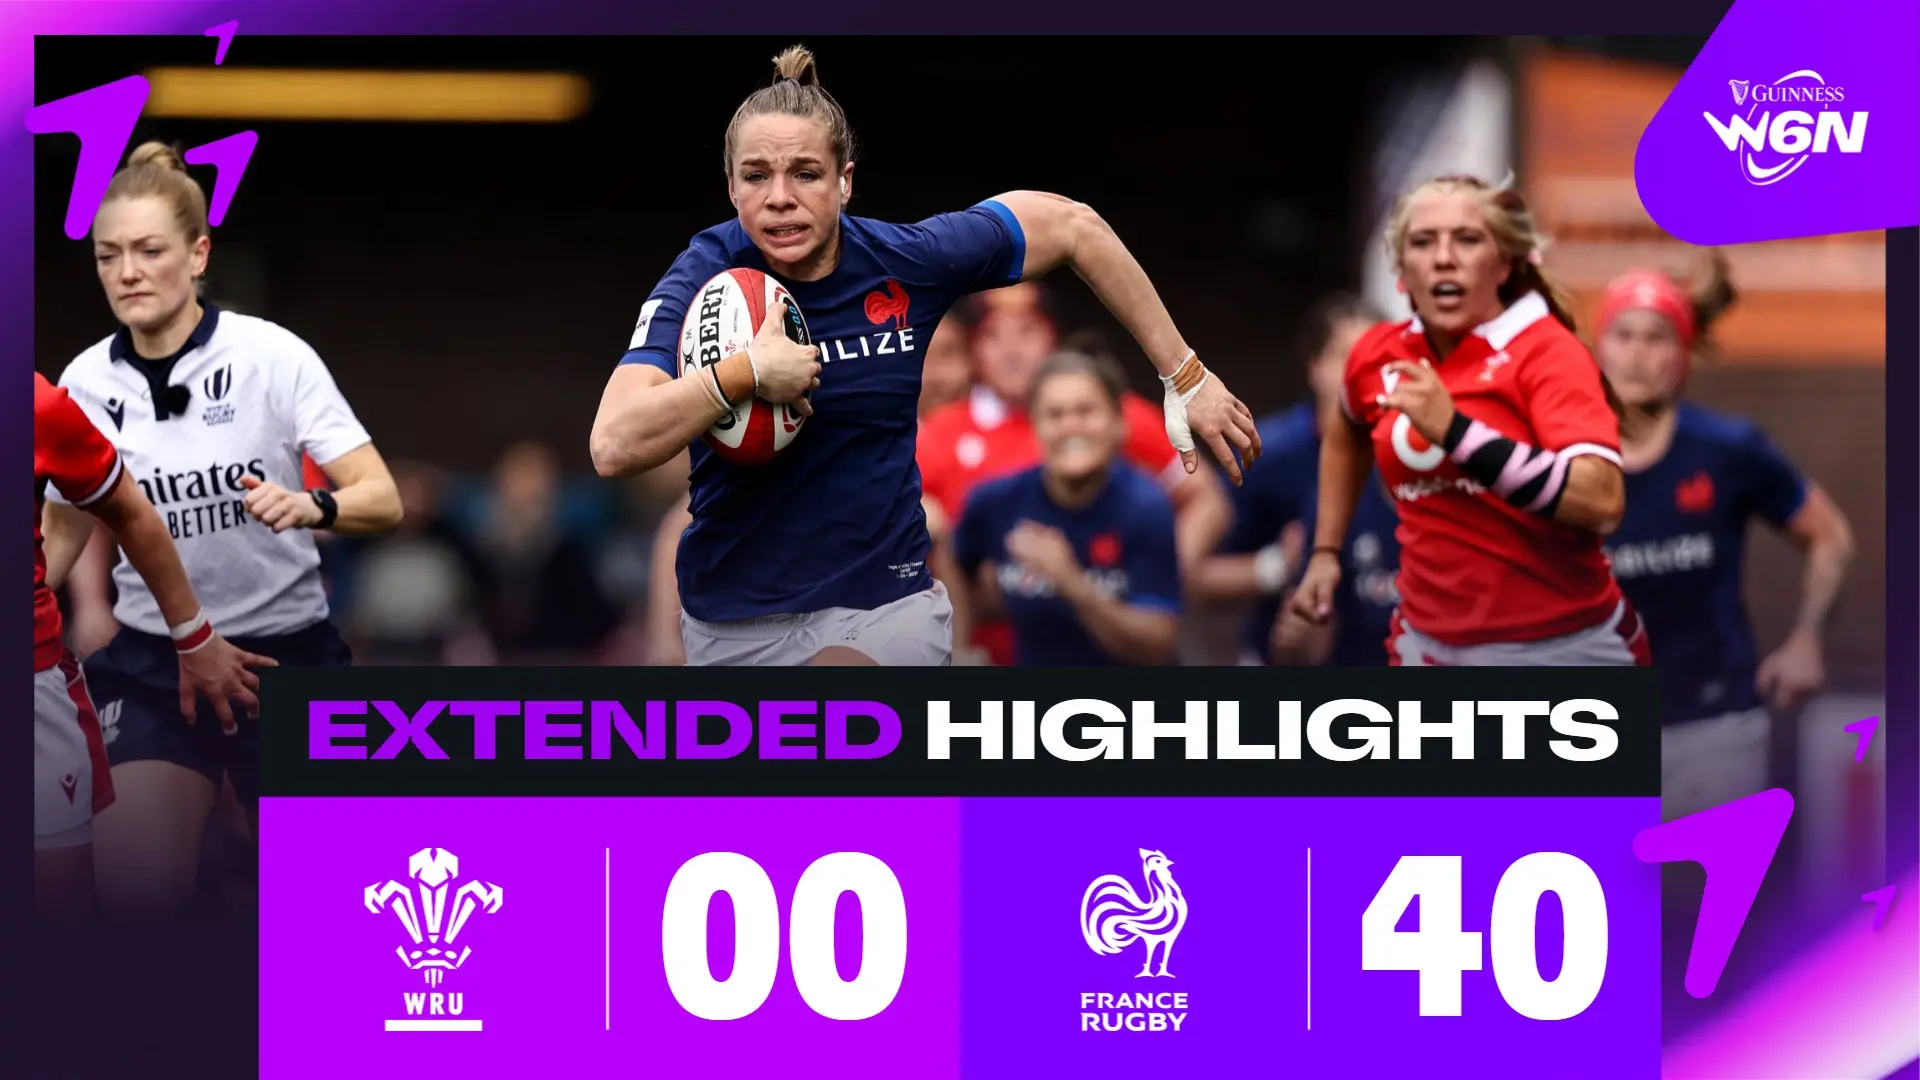 Extended - Wales v France - Thumb